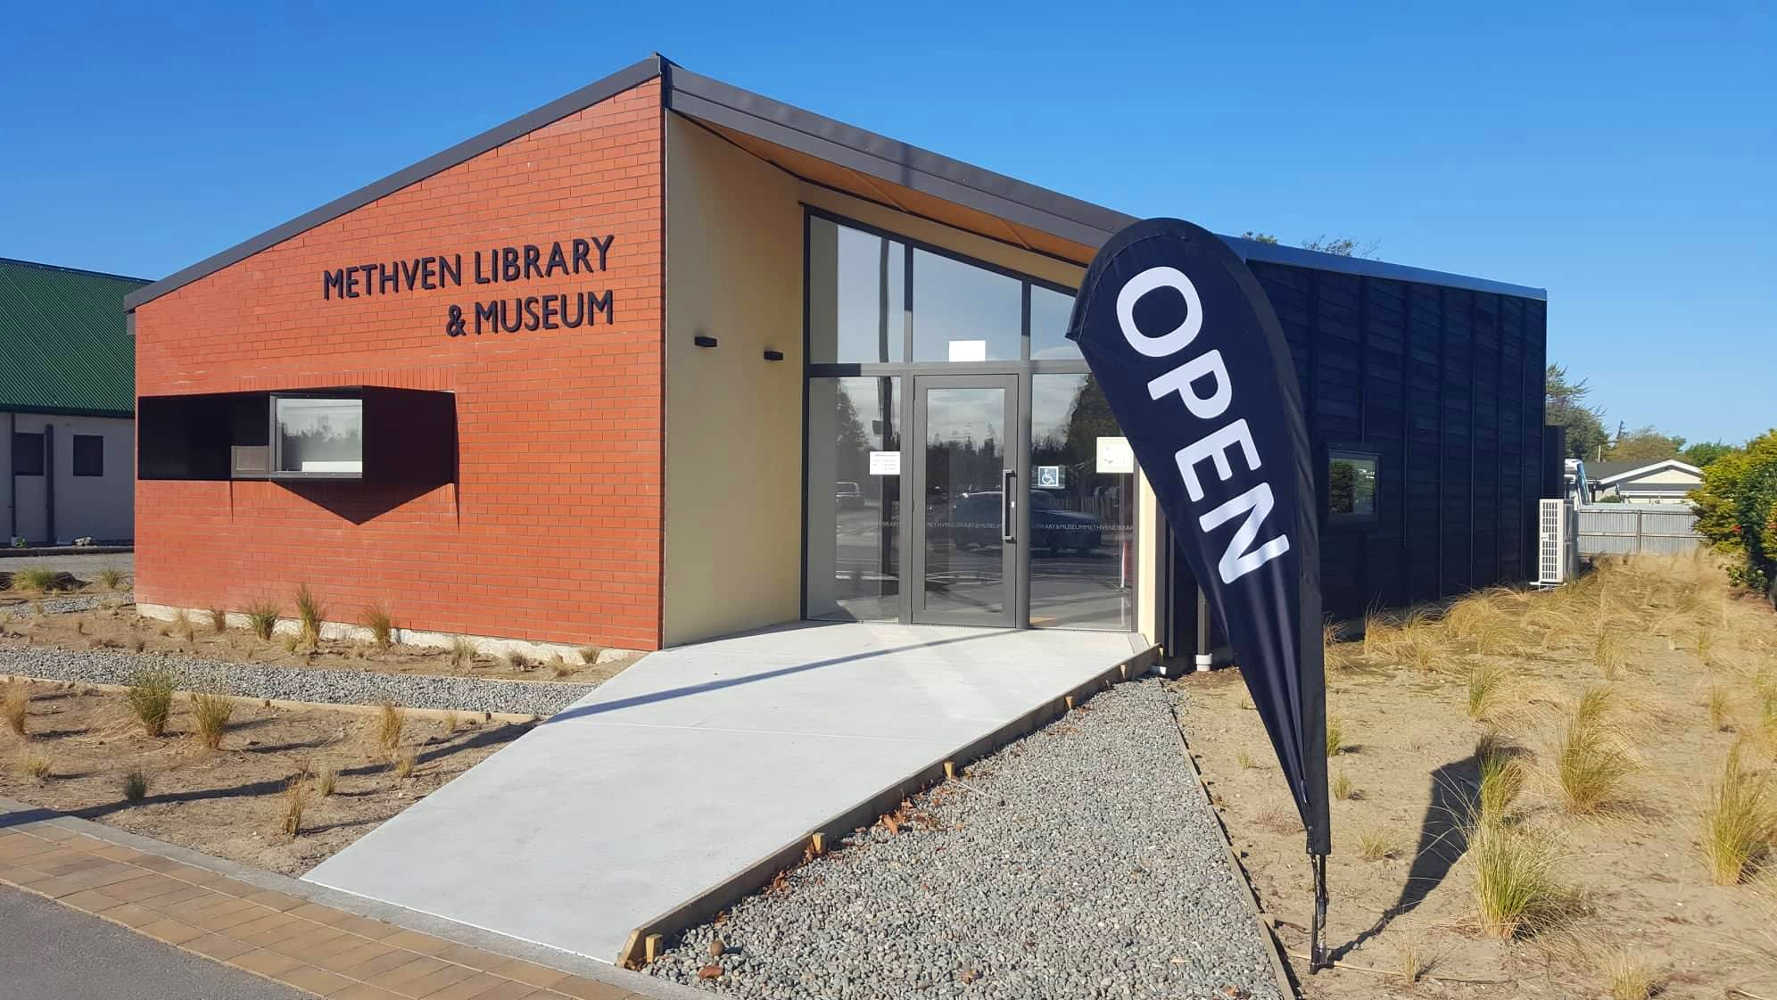 @Methven Library & Museum